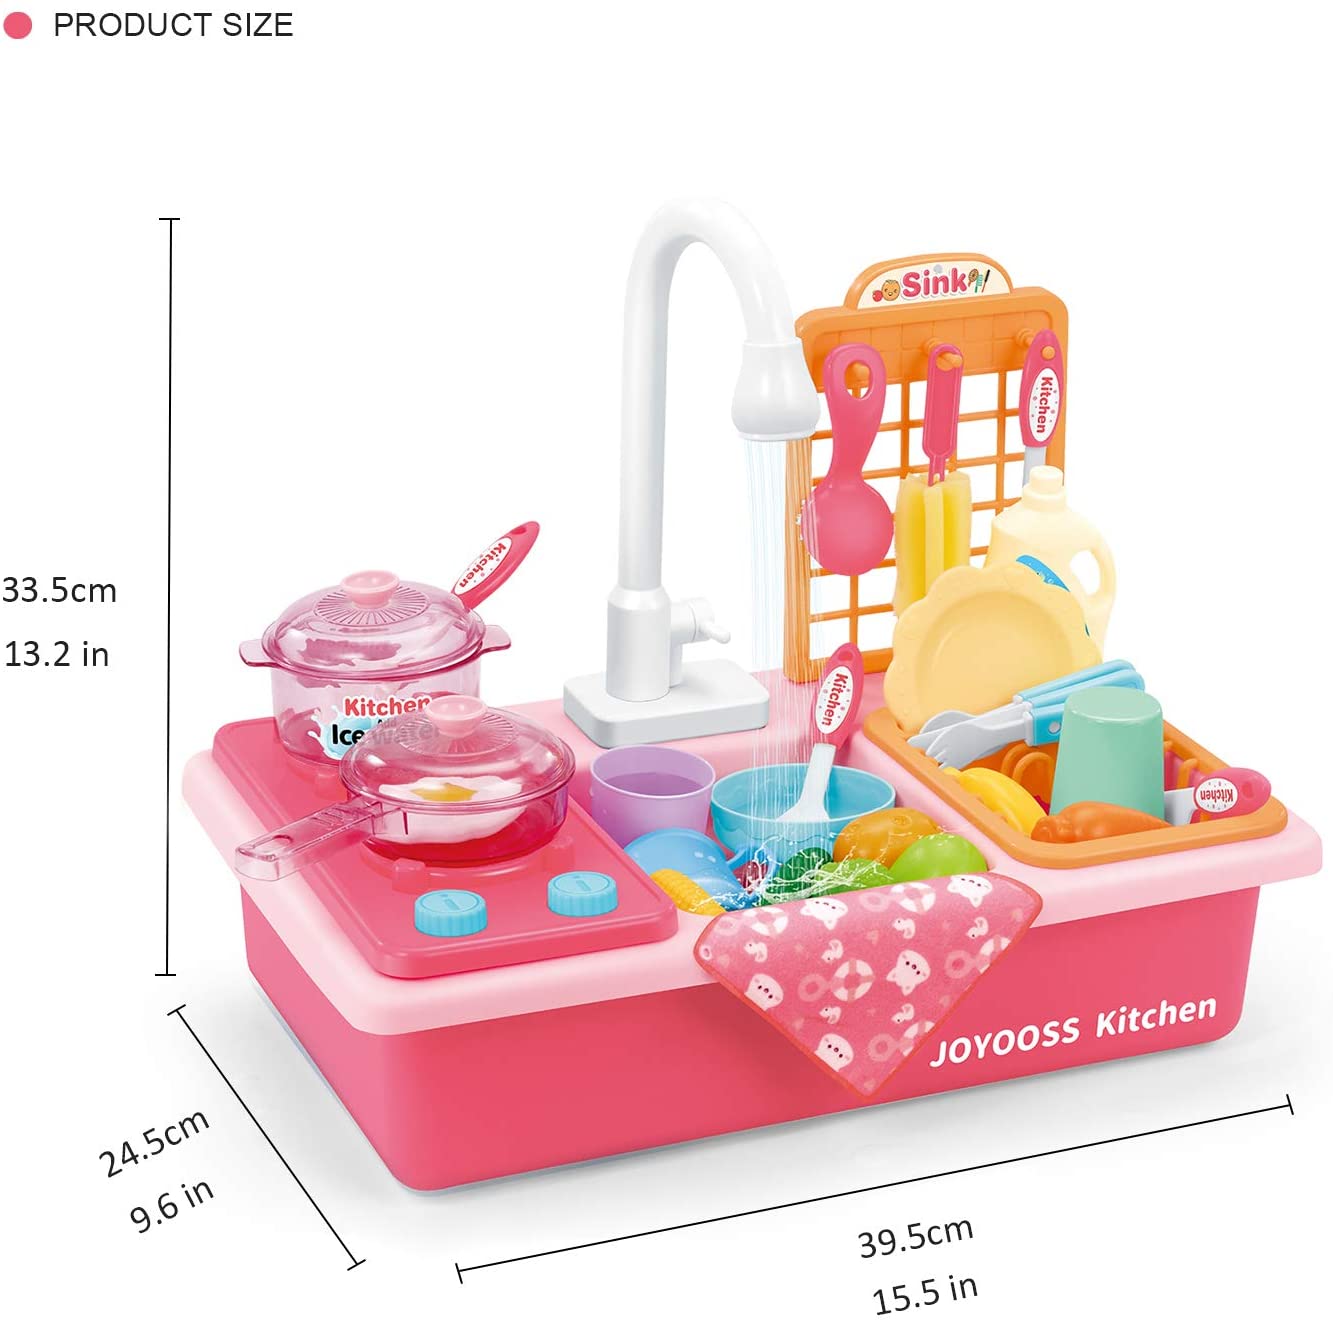 Joyooss Kids Kitchen Playsets, Play Sink with Running Water & Functional Faucet, Water Toys Toddler Toys for Kids - Pink